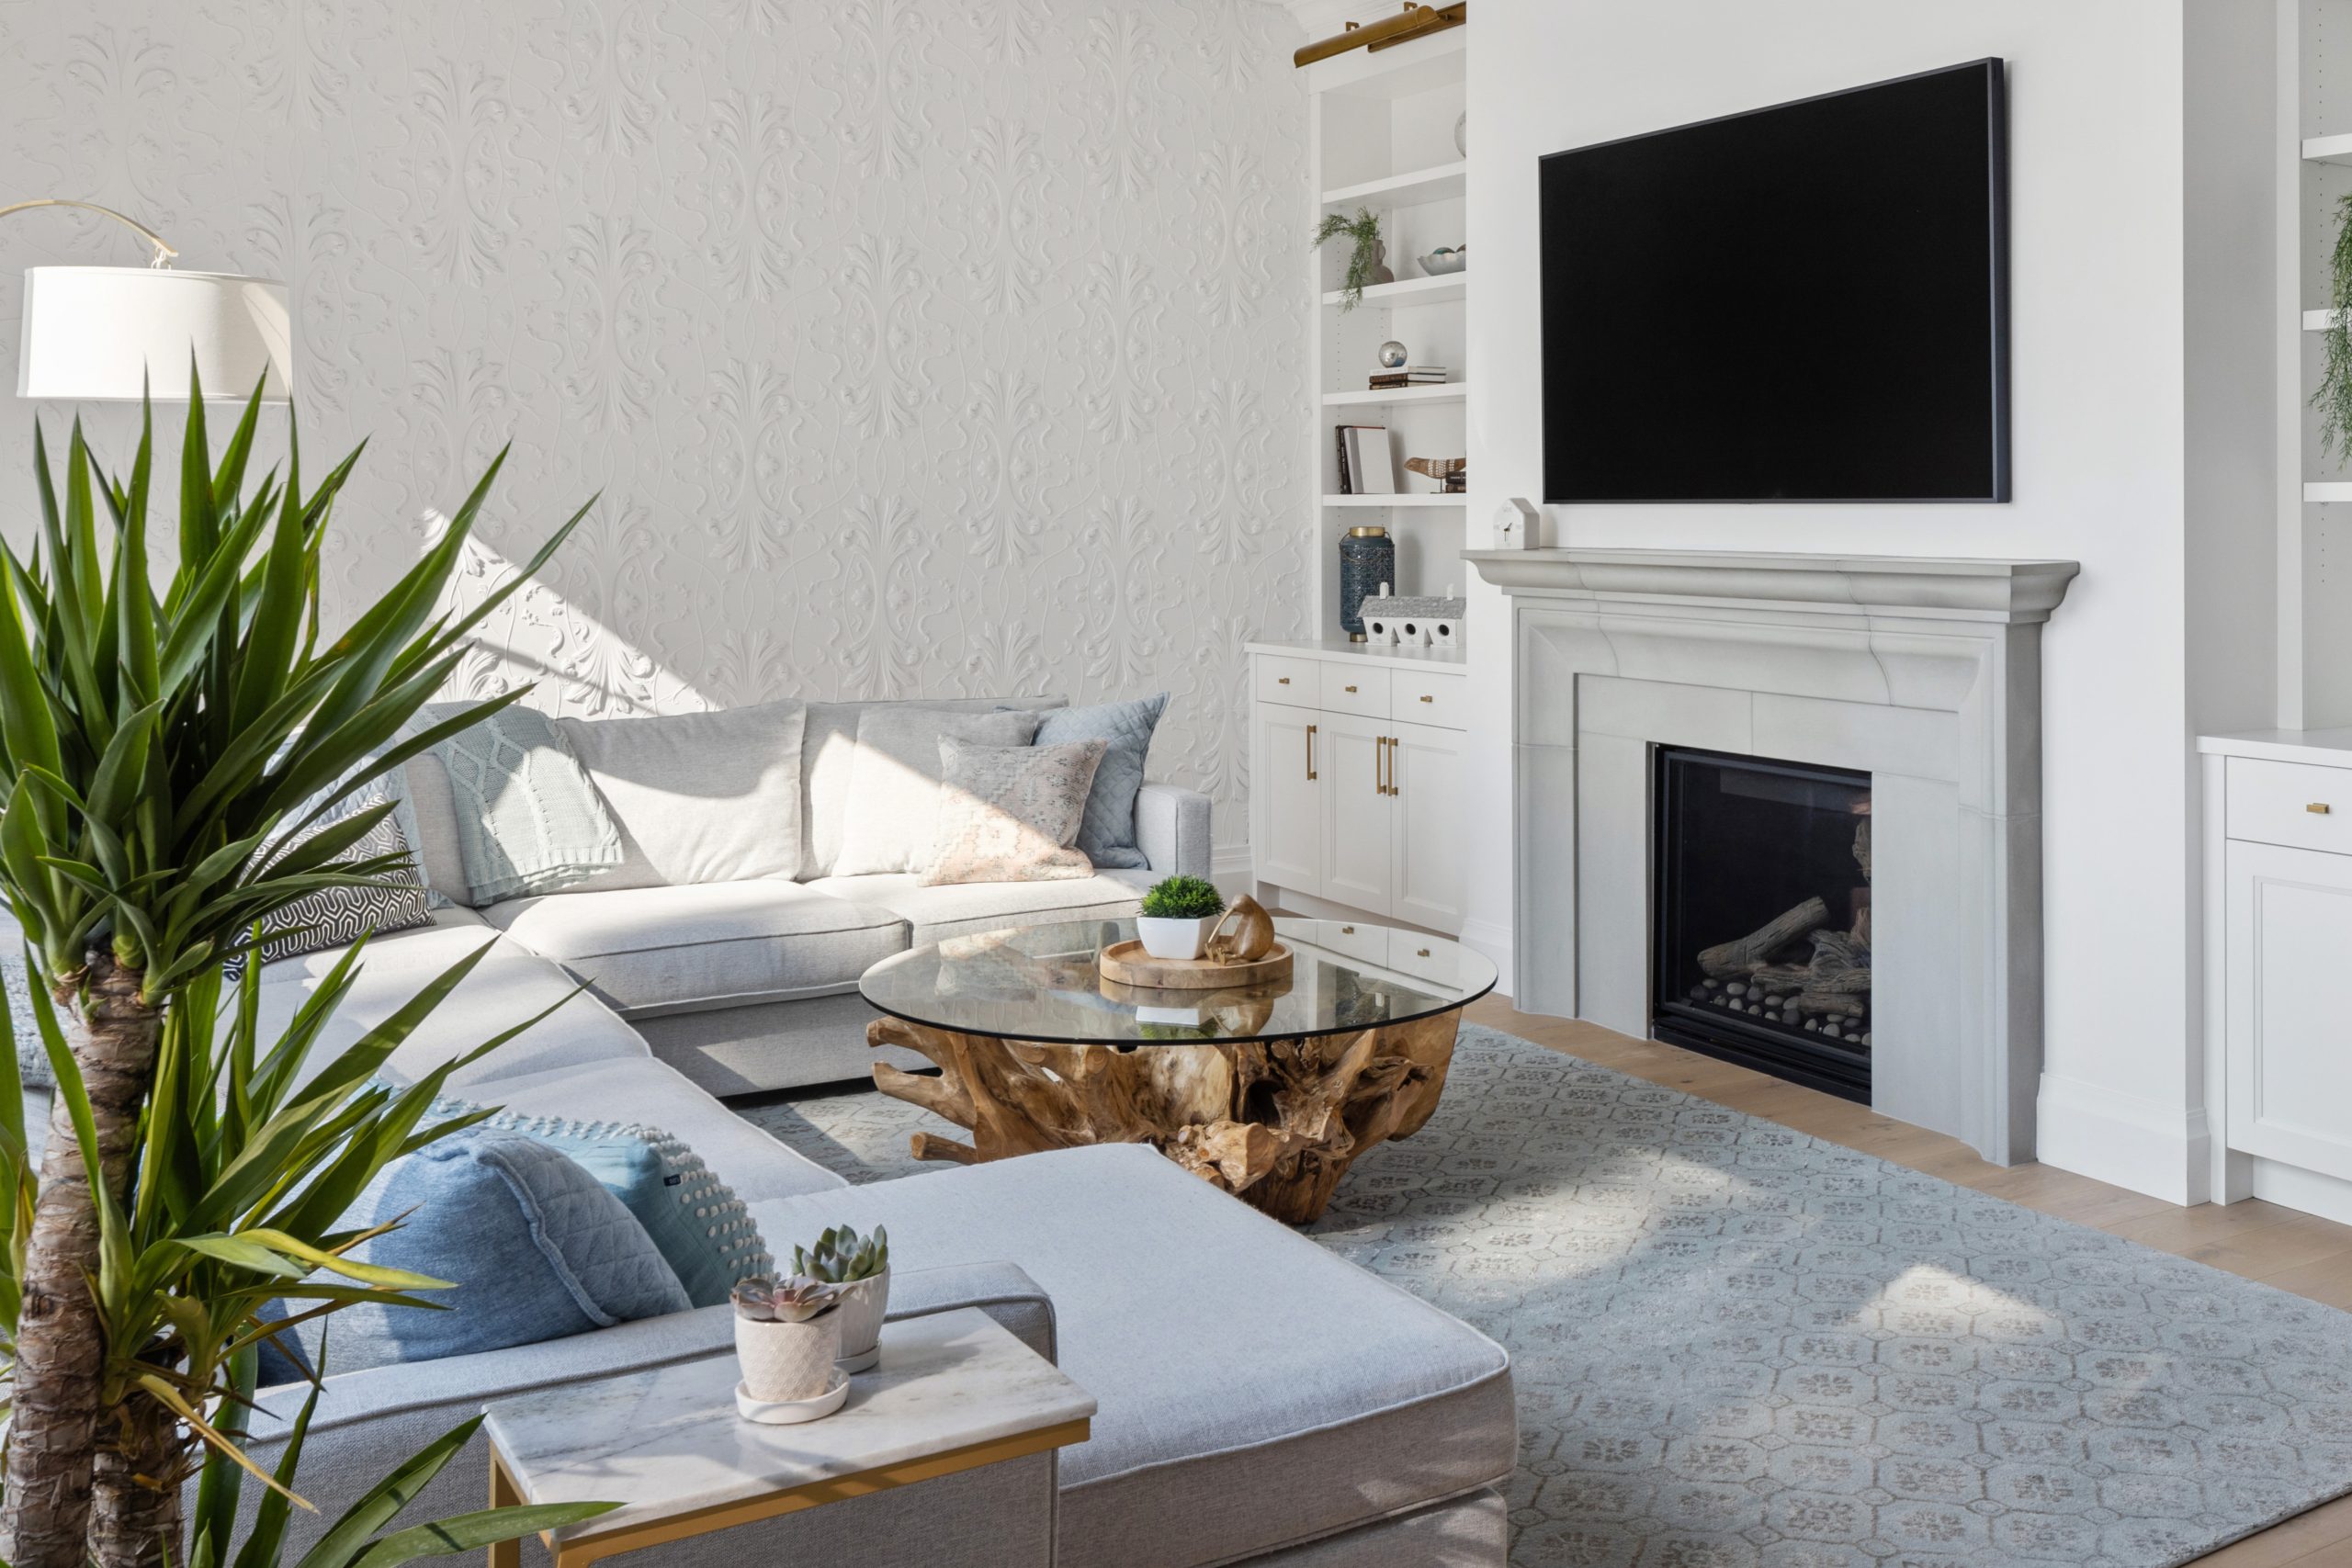 How to choose a fireplace surround to fit your home